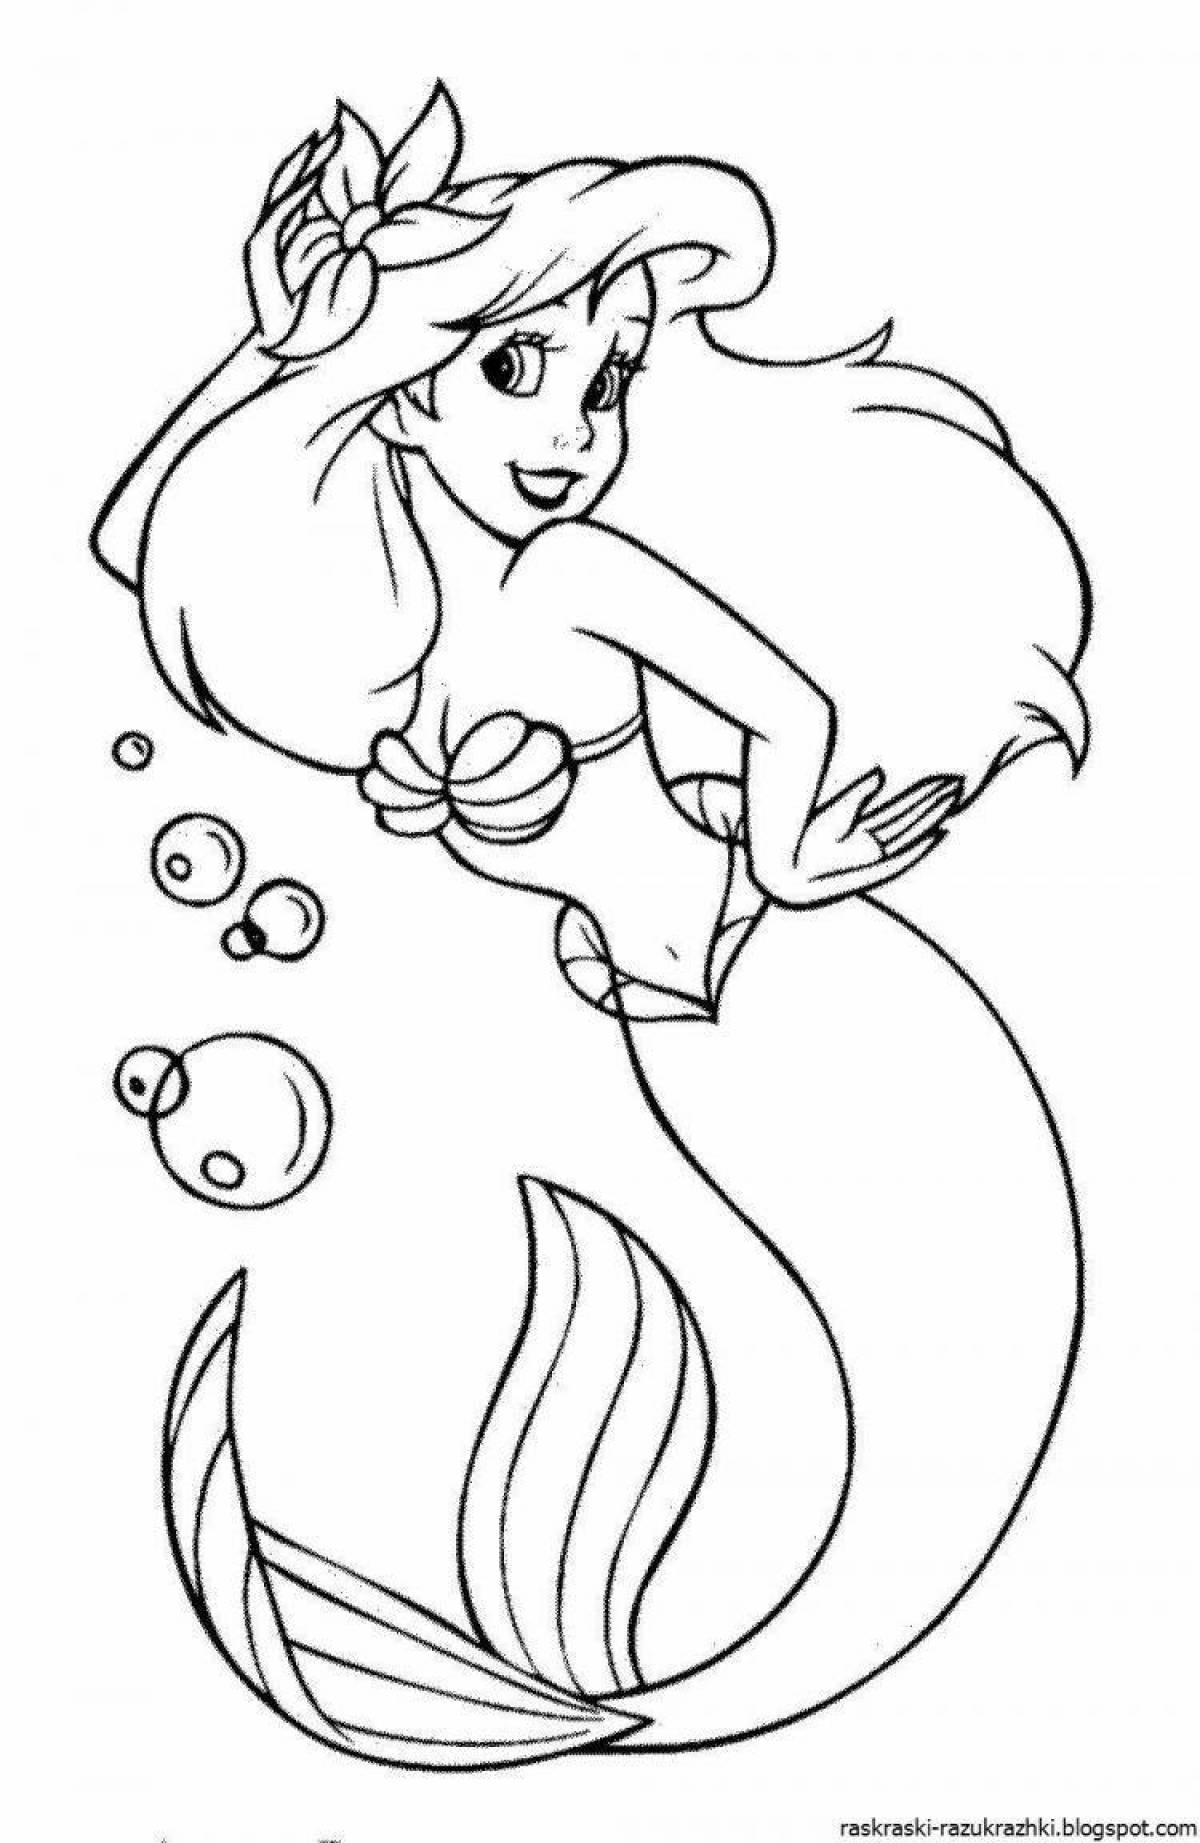 Amazing mermaid coloring book for kids 3-4 years old